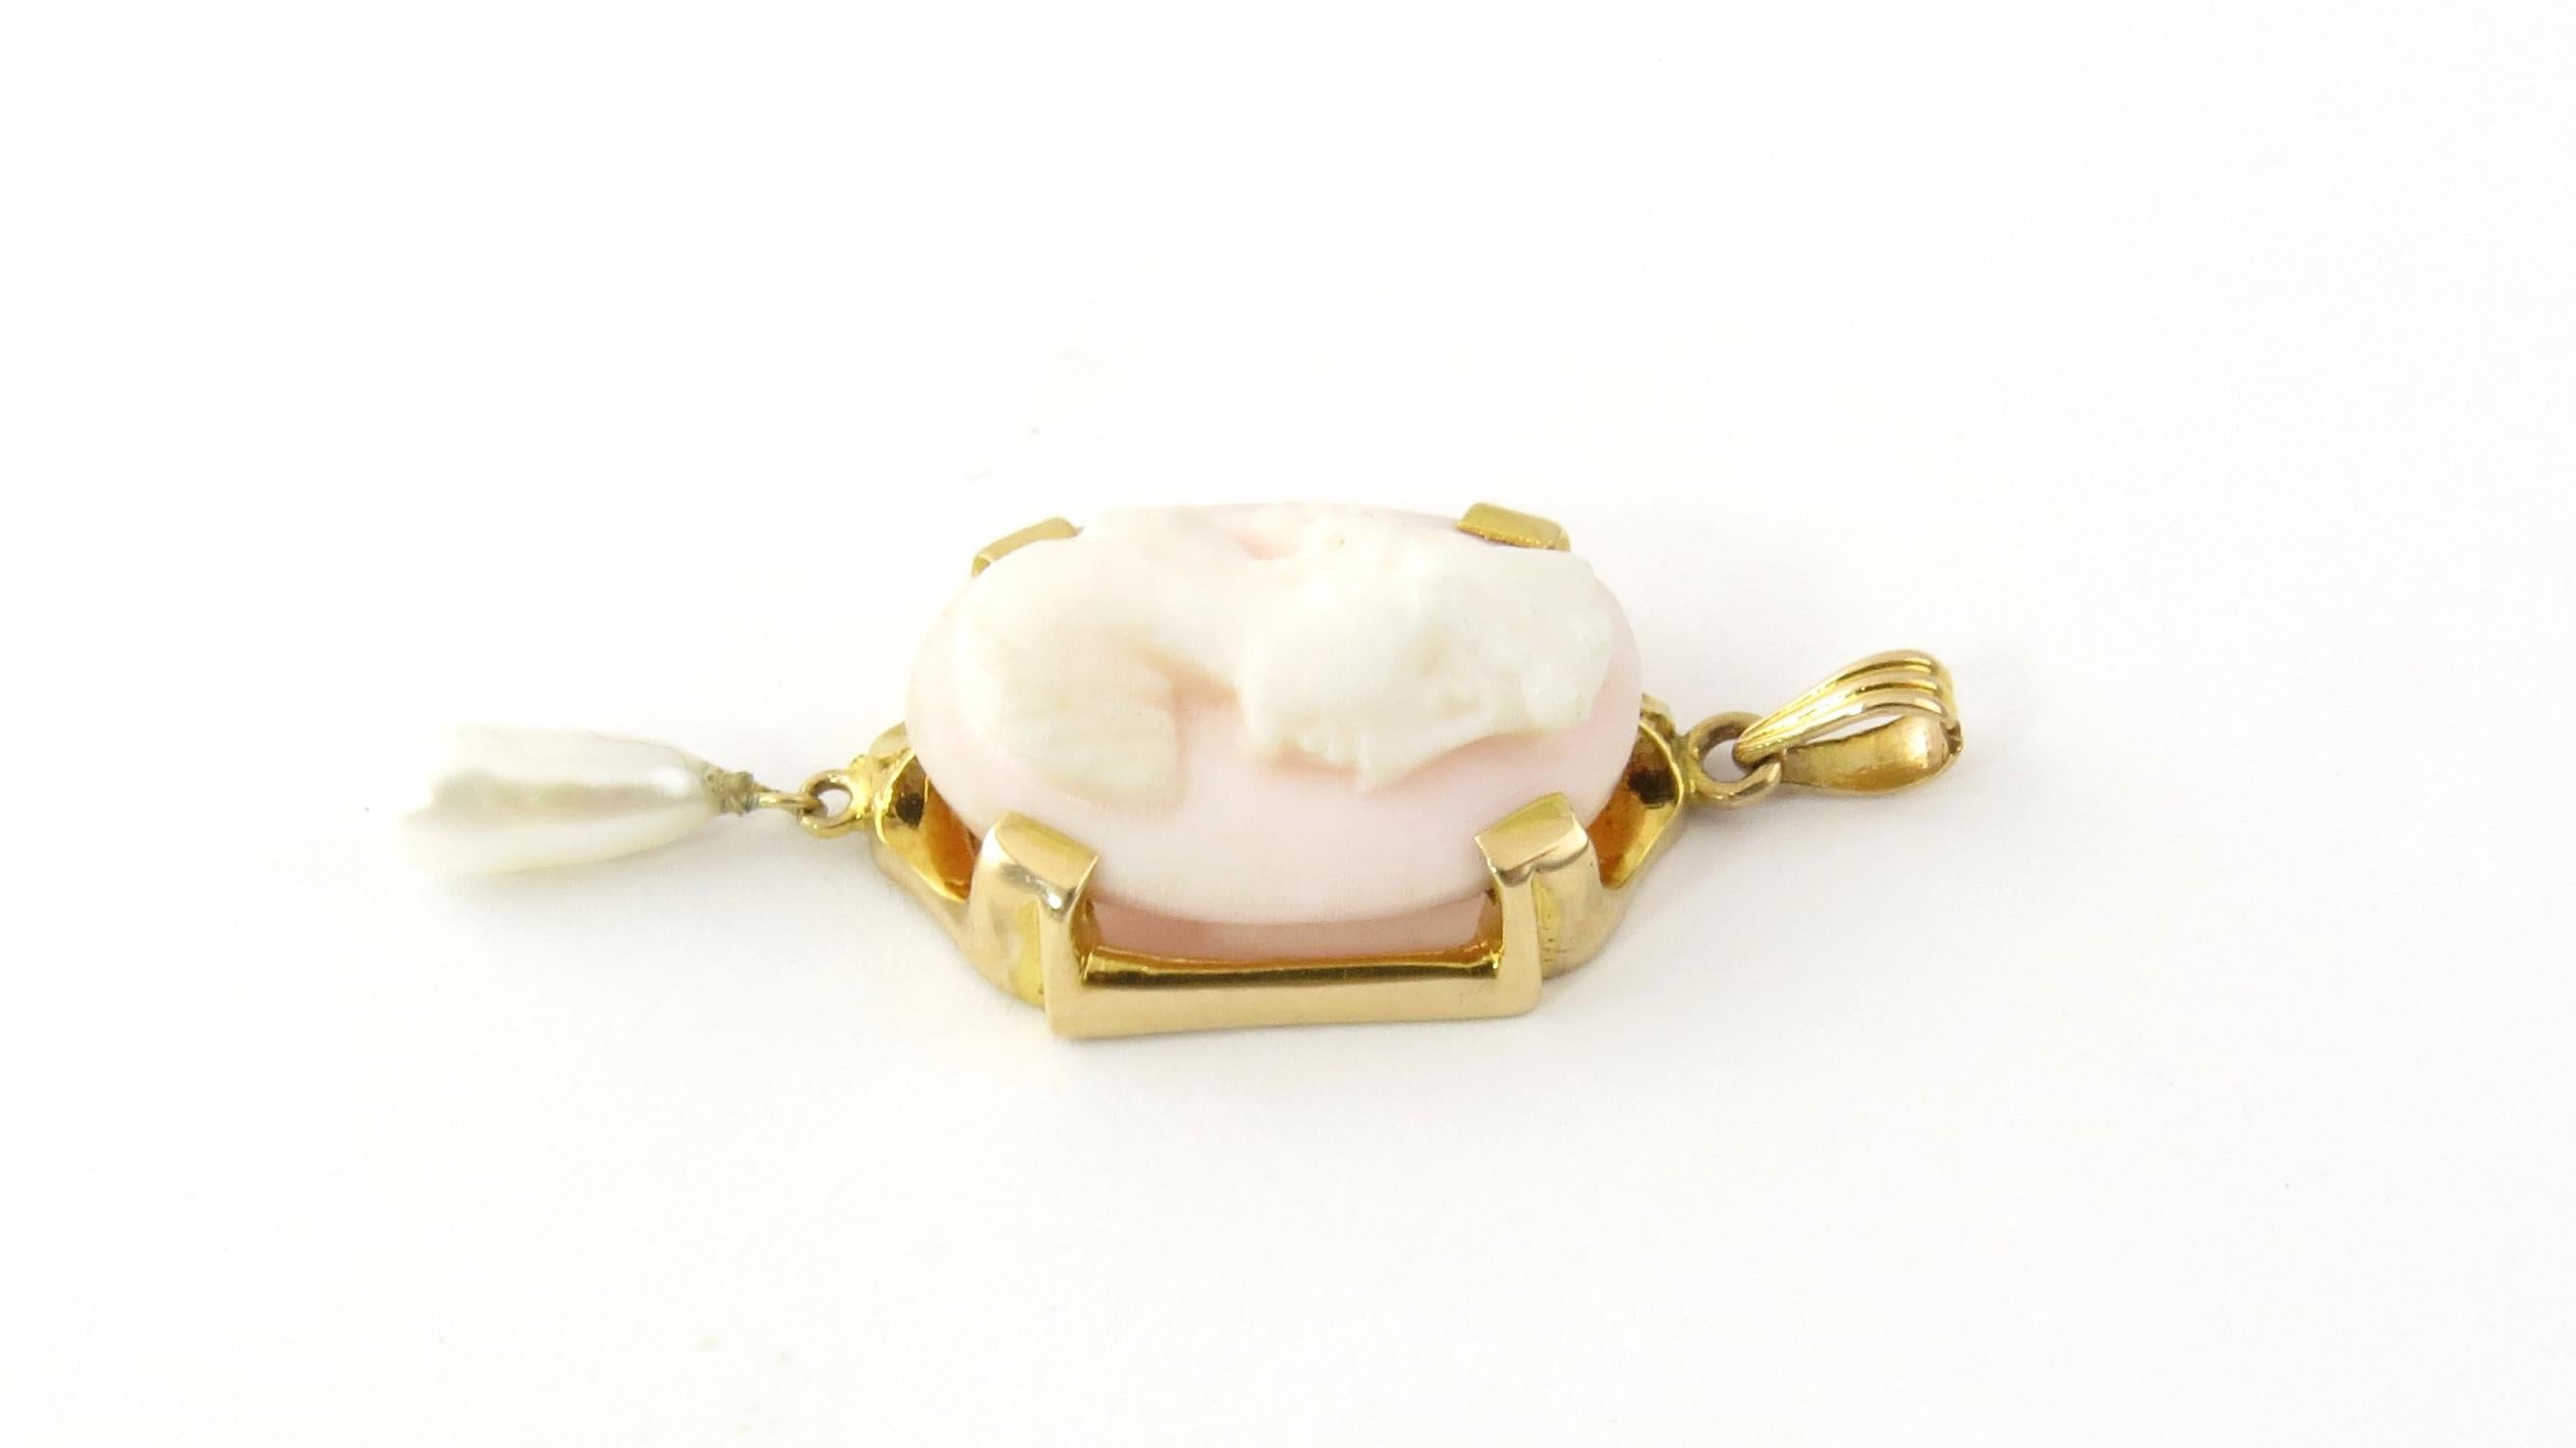 Vintage 10 Karat Yellow Gold and Pearl Cameo Pendant

This elegant cameo pendant features a lovely lady in profile set in classic 10K yellow gold with a dangling freshwater pearl.

Size: 22 mm x 13 mm

Weight: 1.8 dwt. / 2.8 gr.

Stamped: 10K

Very